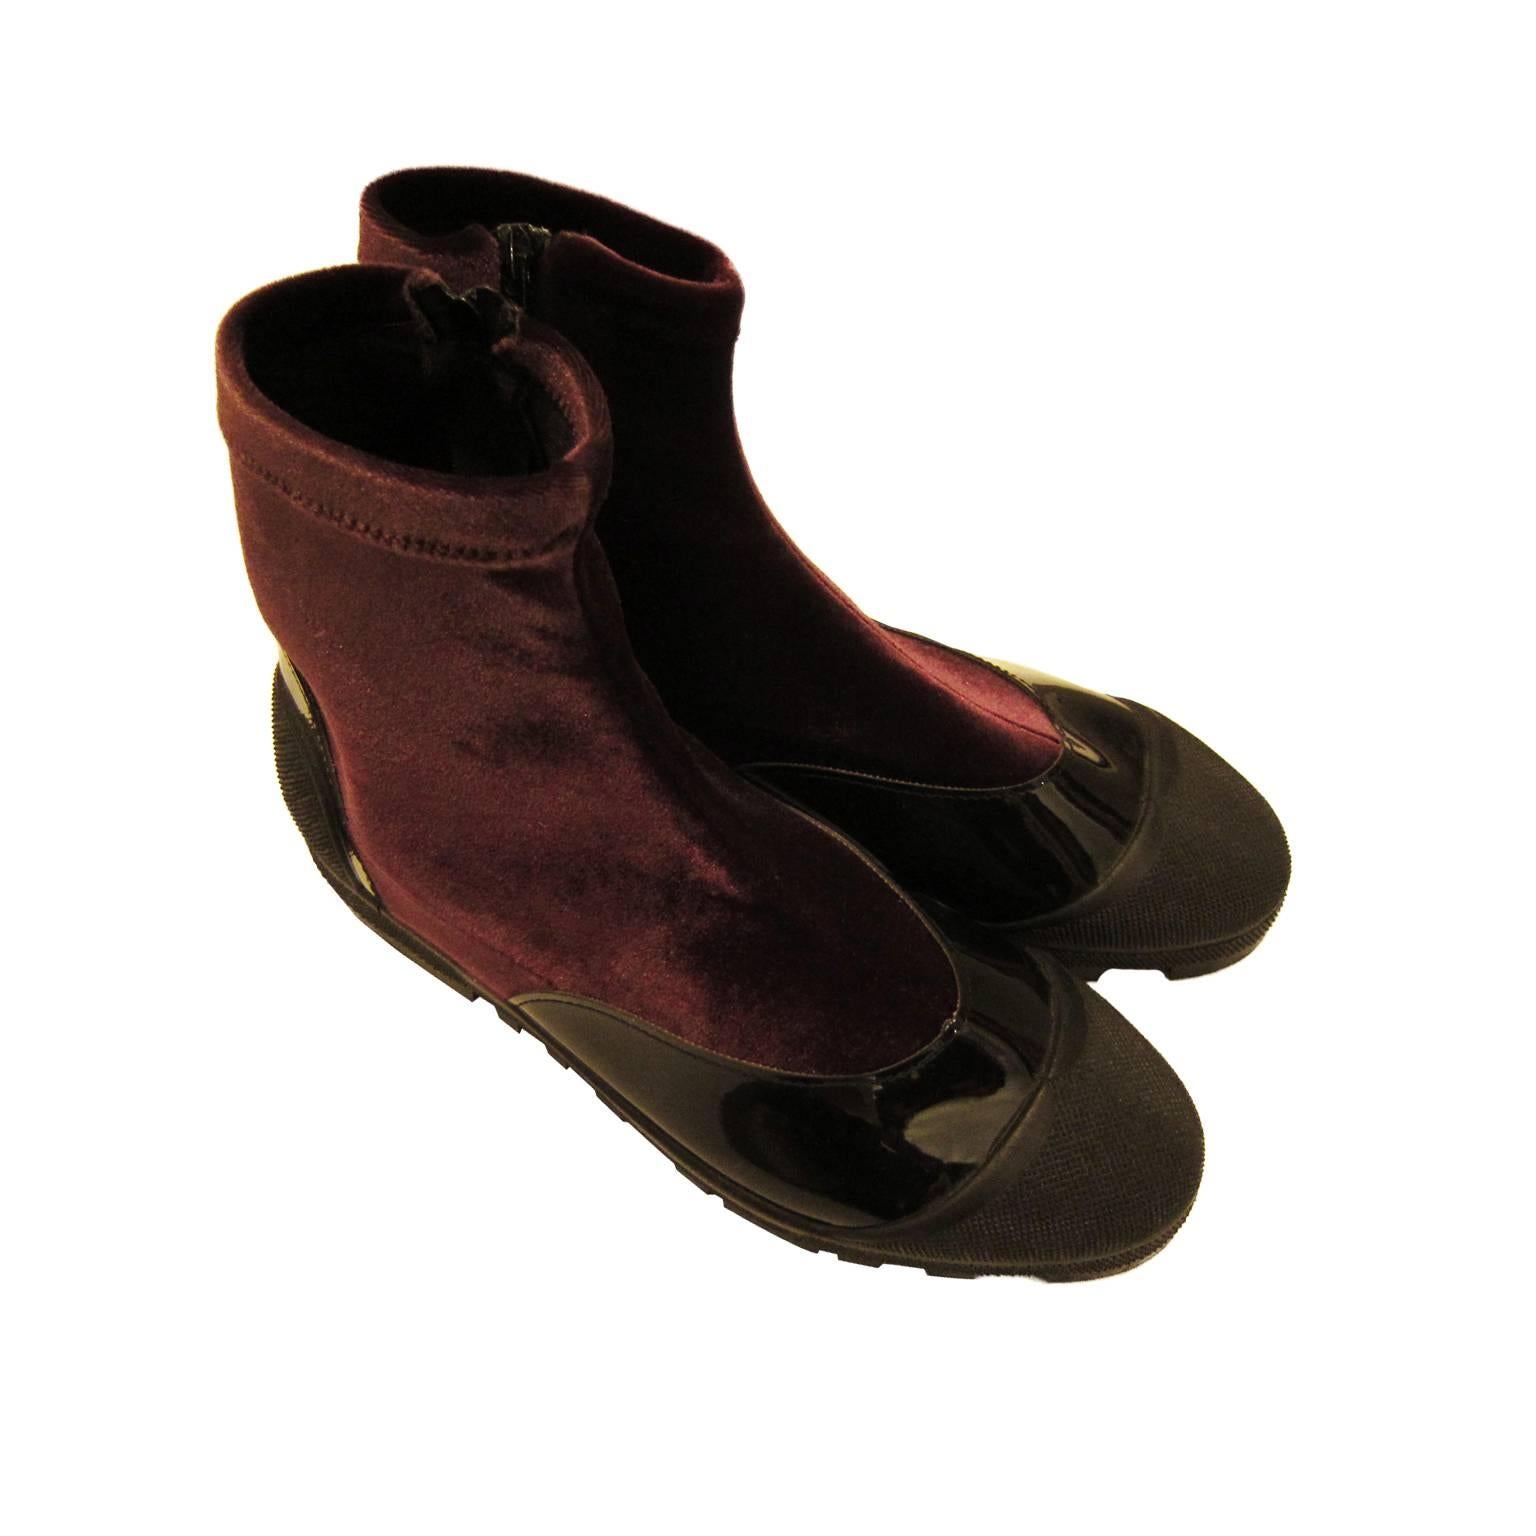 Rare Issey Miyake boots from circa 80s new in original box.
Bordeaux velvet textured elastic material with black enamel toe detail with zip closure.
Size : 41 EU 